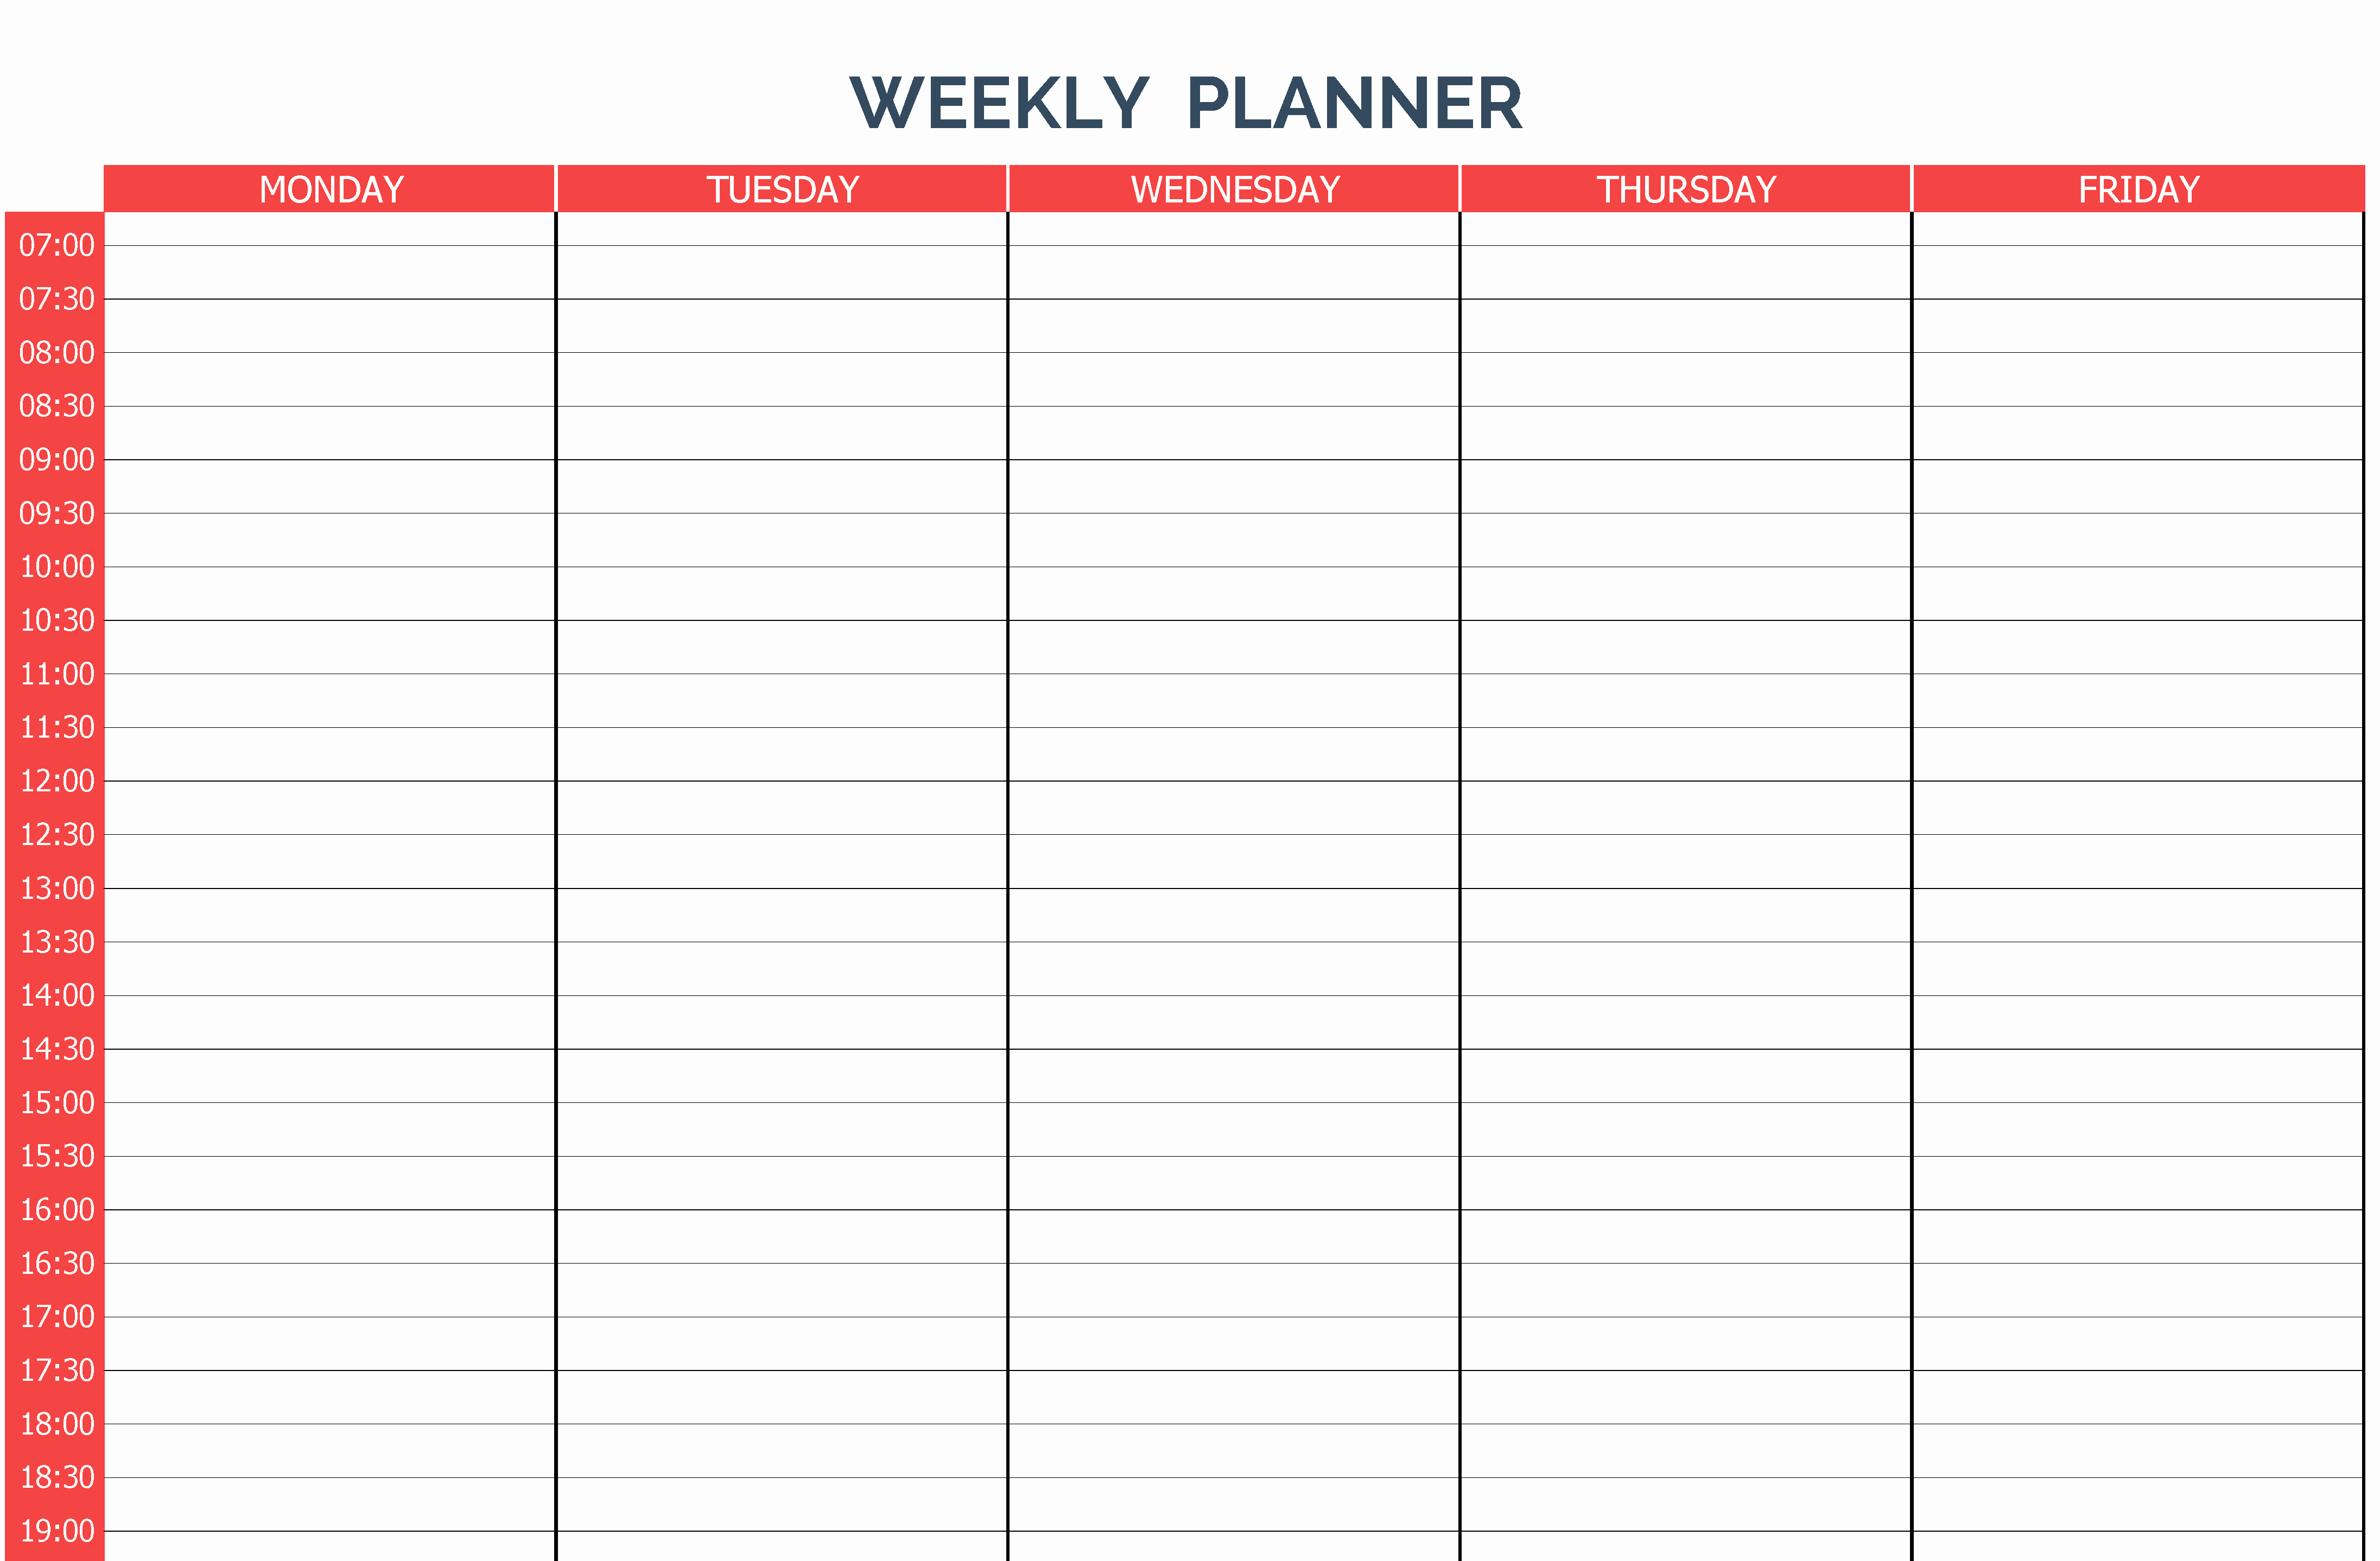 Weekly Planner Template Pdf Fresh 10 Weekly Planner Templates Word Excel Pdf formats